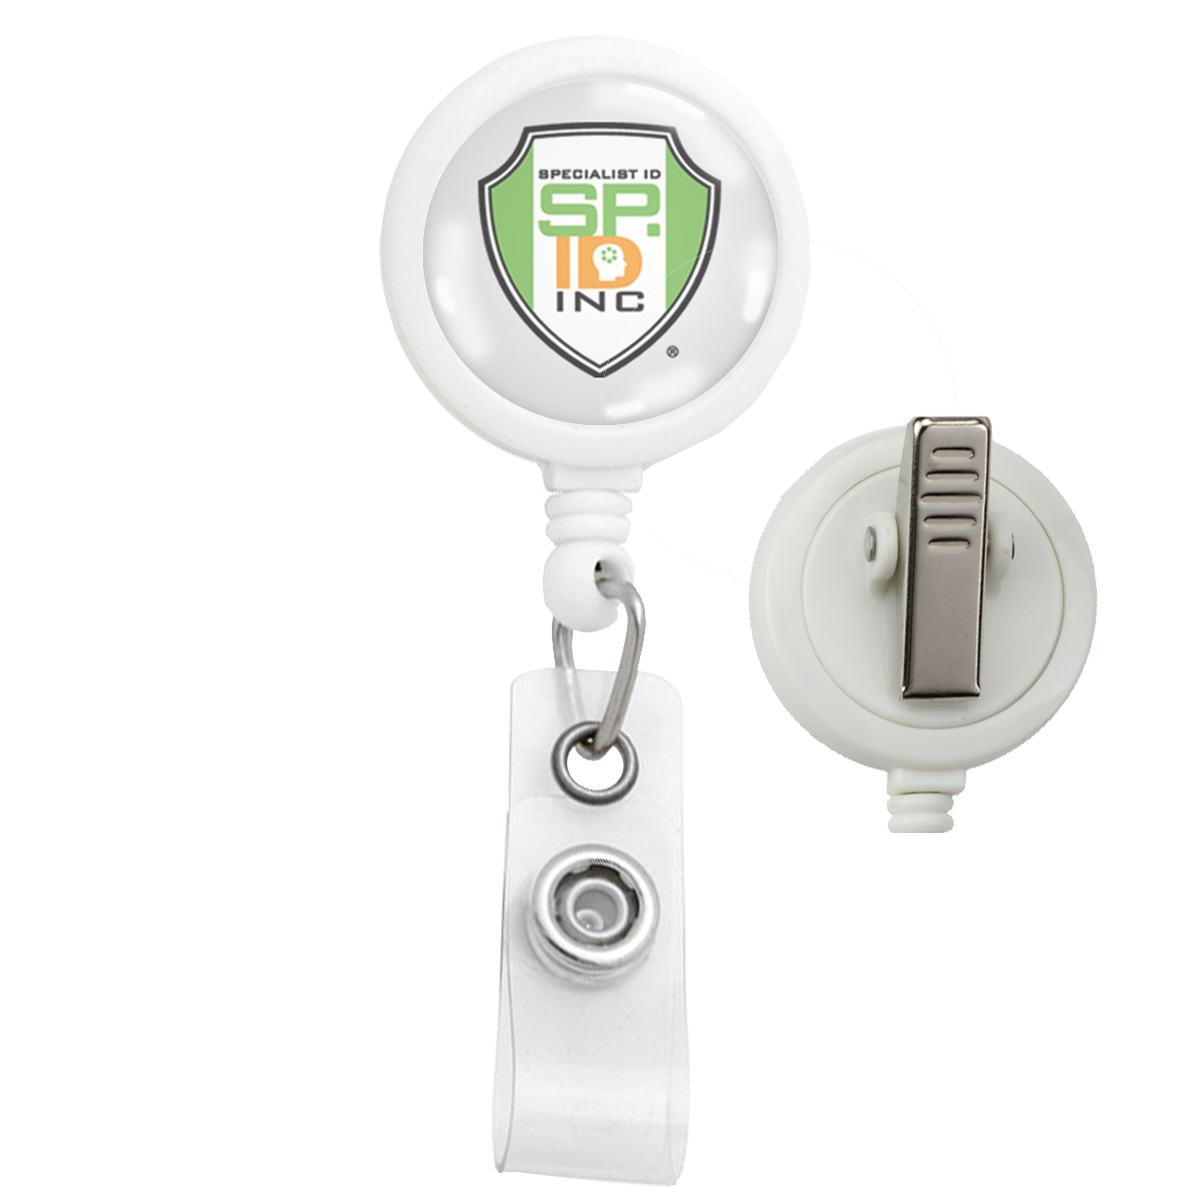 A white Custom Max Label Badge Reel with 1 Inch Smooth Face and Swivel Spring Clip - Personalize with Your Logo, perfect for promoting brand awareness while maintaining a professional image.